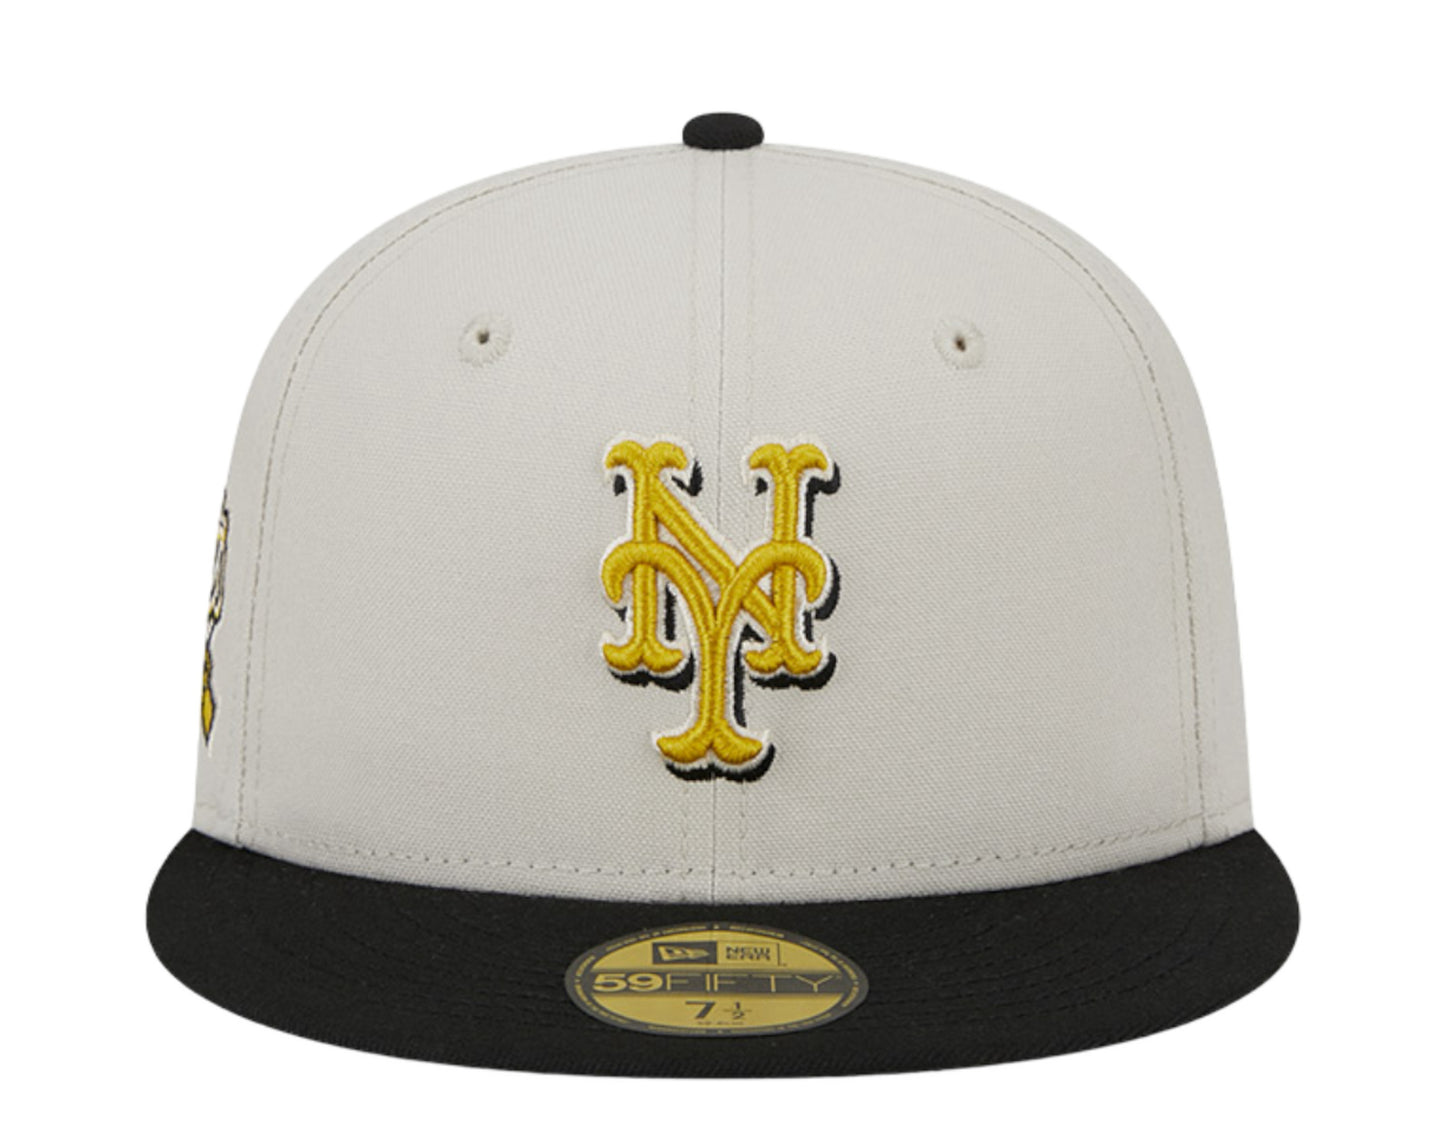 New Era 59Fifty MLB New York Mets Two Tone Stone Fitted Hat